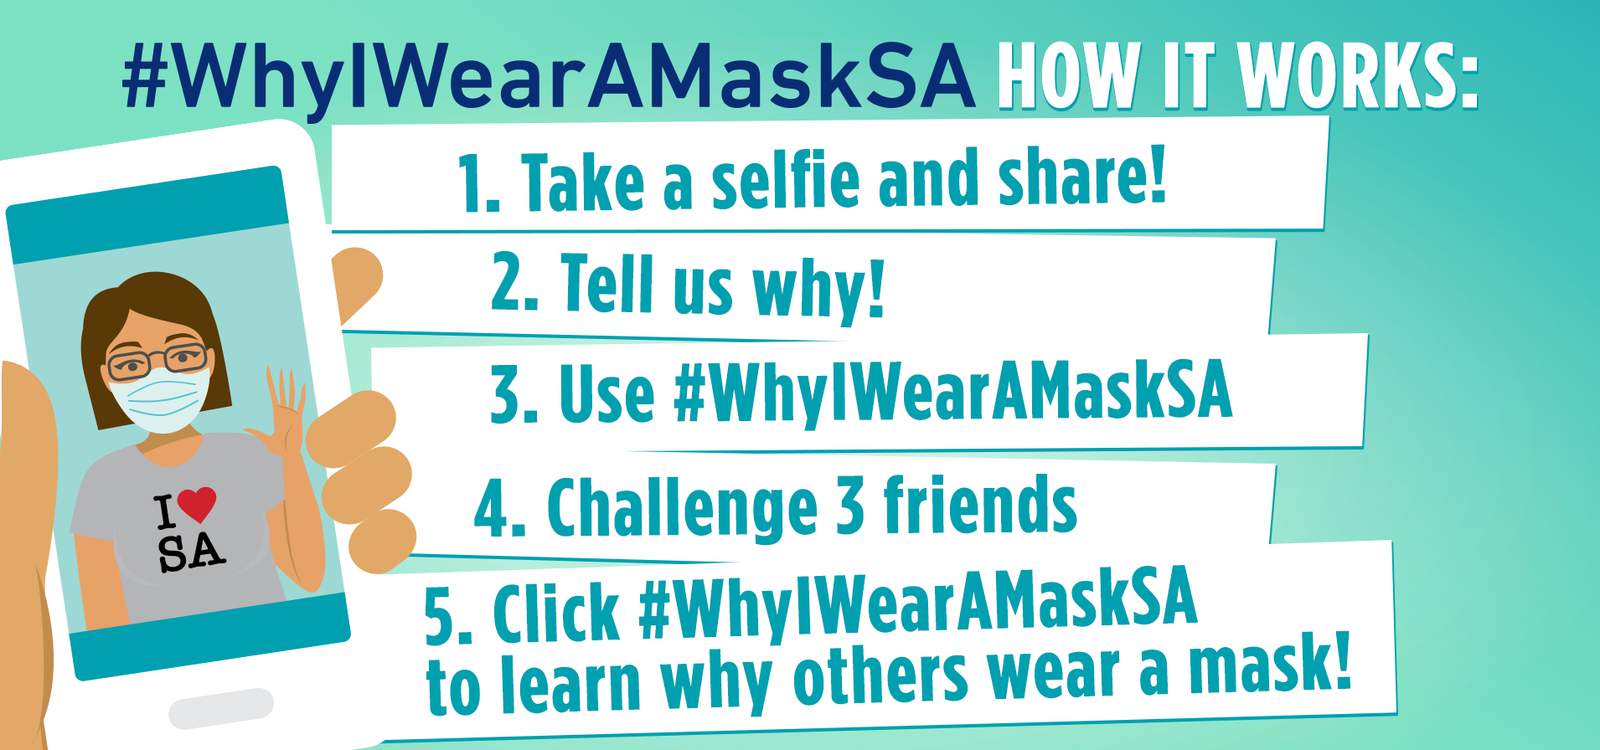 Bexar County, University Health launch mask campaign asking people to share #whyIwearamasksa